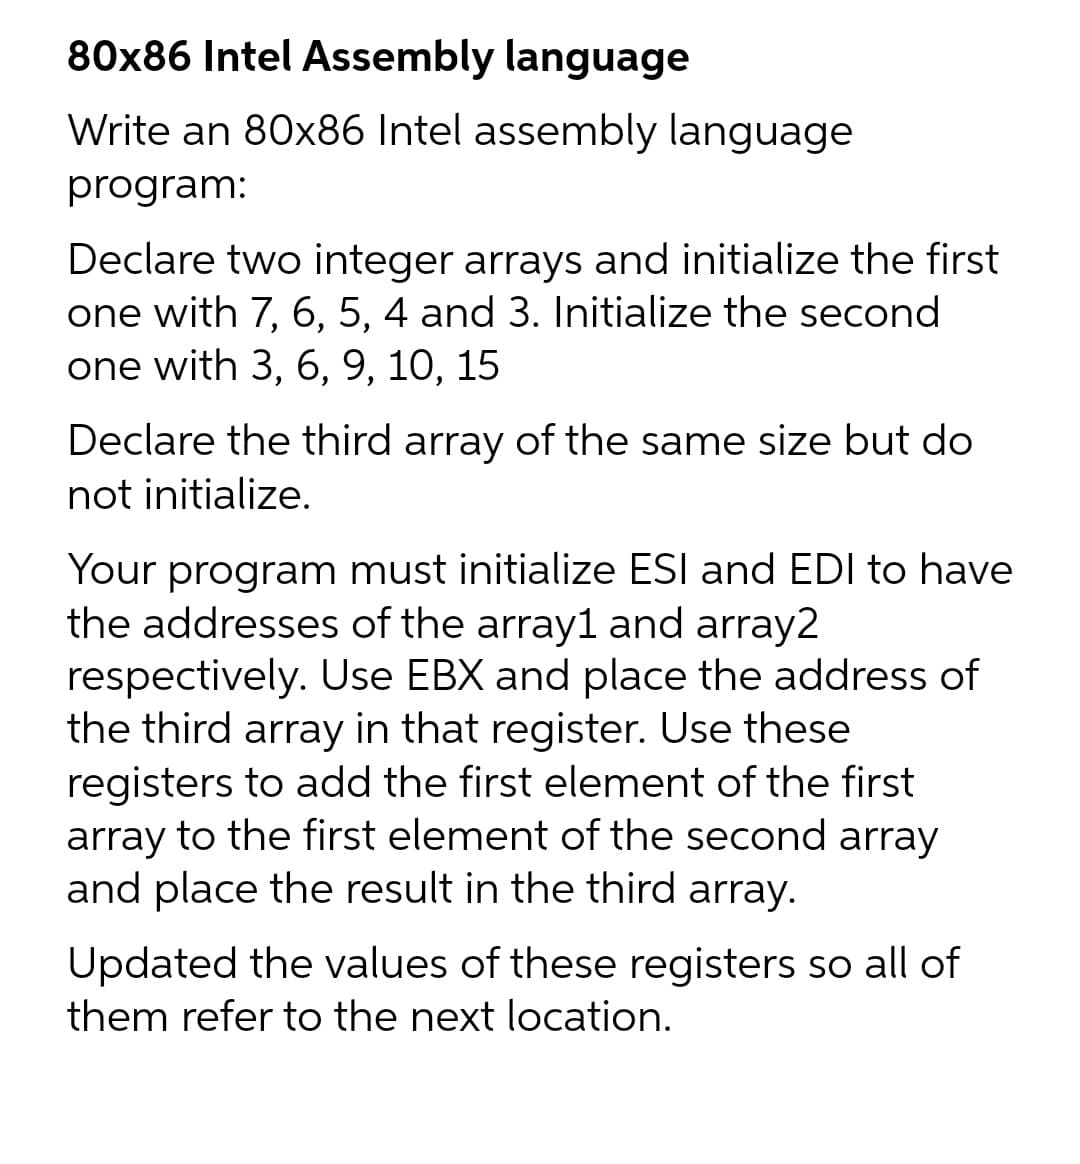 80x86 Intel Assembly language
Write an 80x86 Intel assembly language
program:
Declare two integer arrays and initialize the first
one with 7, 6, 5, 4 and 3. Initialize the second
one with 3, 6, 9, 10, 15
Declare the third array of the same size but do
not initialize.
Your program must initialize ESI and EDI to have
the addresses of the array1 and array2
respectively. Use EBX and place the address of
the third array in that register. Use these
registers to add the first element of the first
array to the first element of the second array
and place the result in the third array.
Updated the values of these registers so all of
them refer to the next location.
